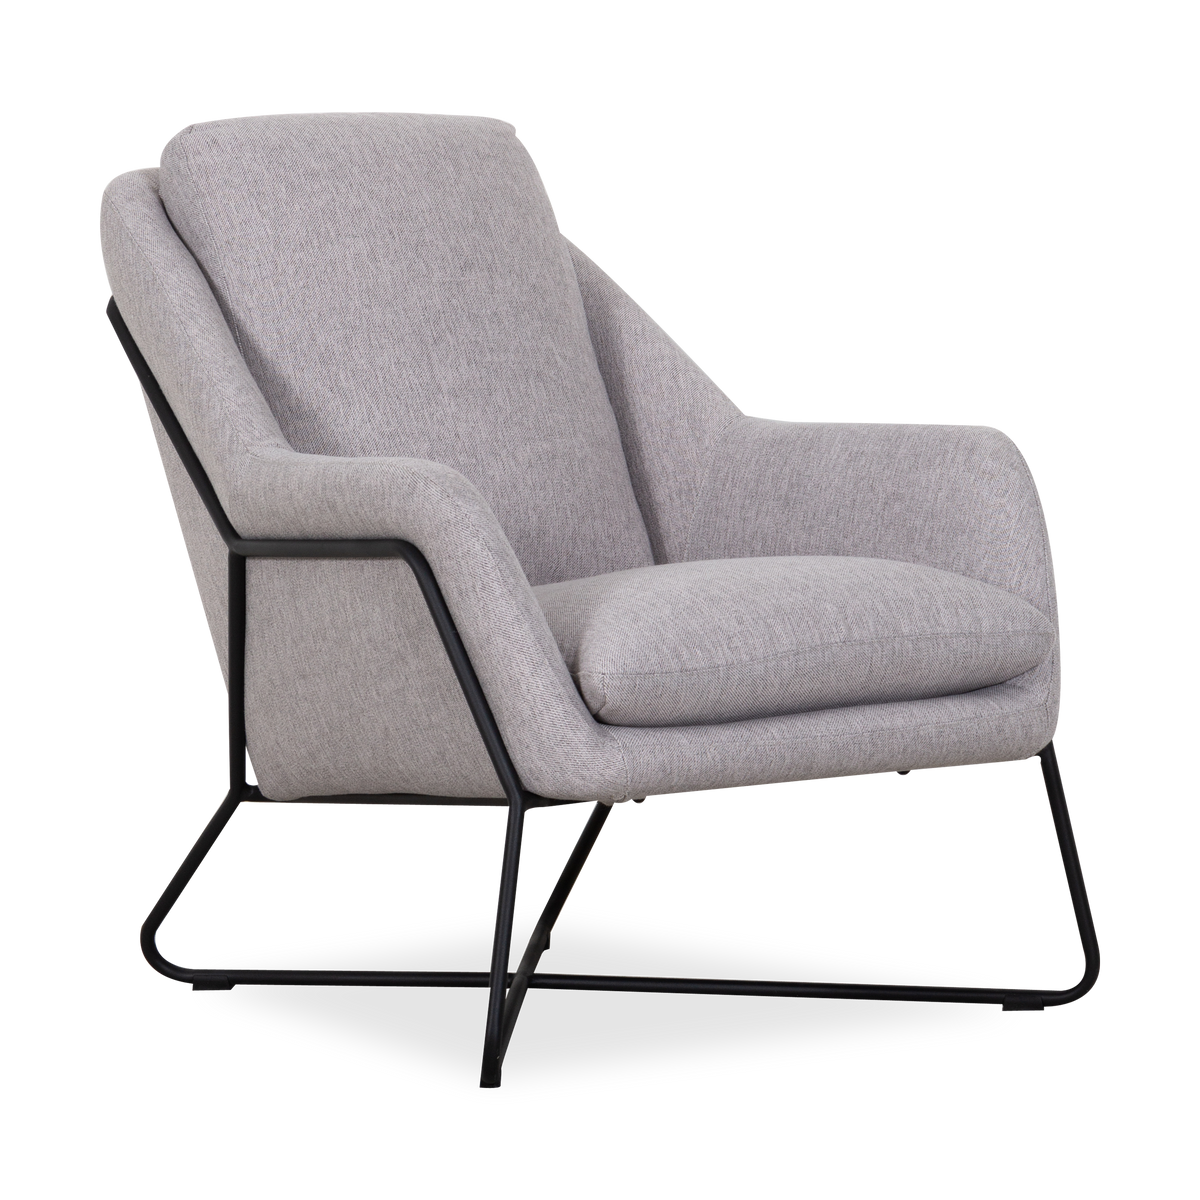 With its inviting seat, the Nixon Lounge Chair offers elevated style for casual lounging.